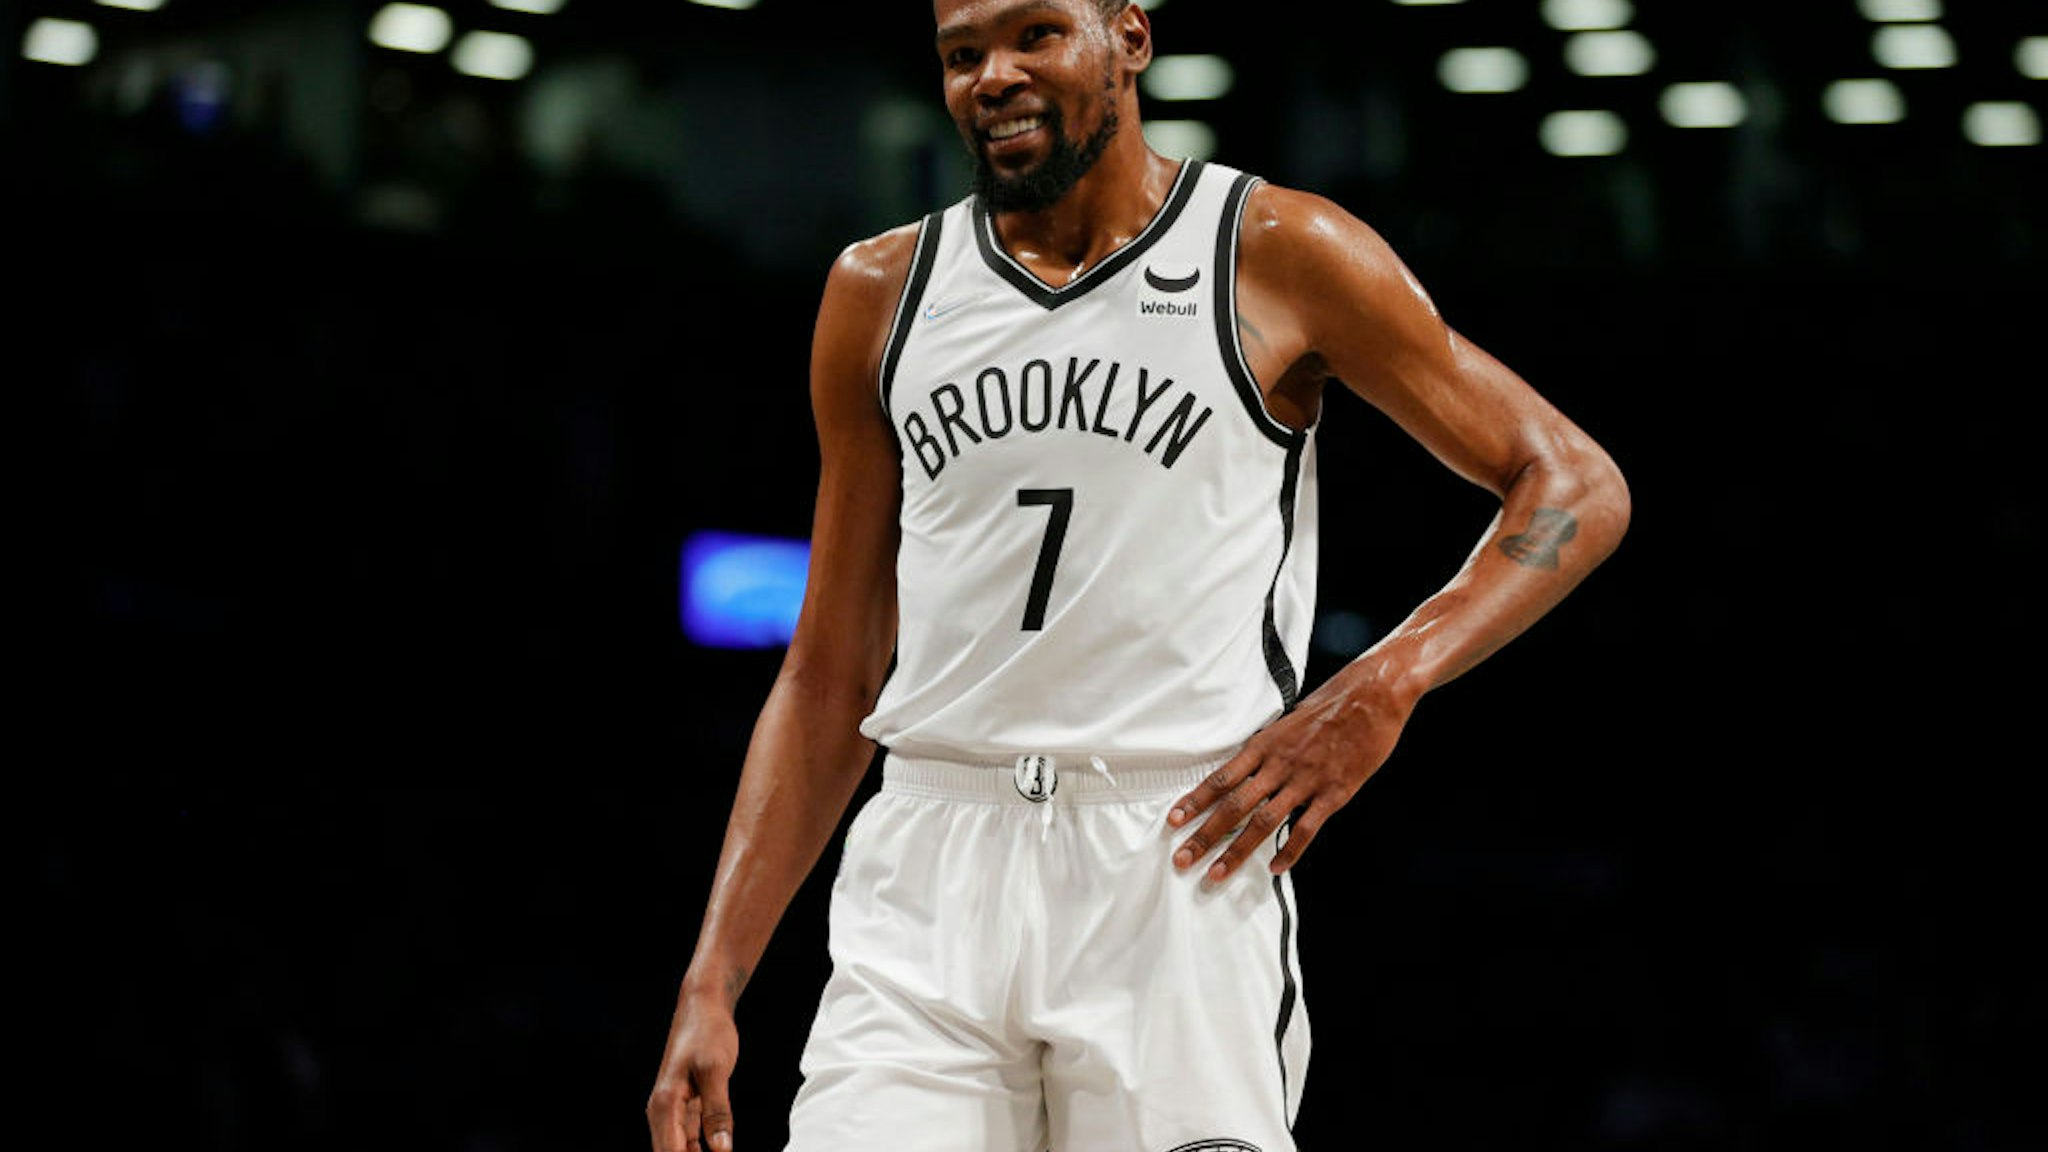 NEW YORK, NEW YORK - OCTOBER 14: Kevin Durant #7 of the Brooklyn Nets smiles during the first half against the Minnesota Timberwolves at Barclays Center on October 14, 2021 in the Brooklyn borough of New York City. NOTE TO USER: User expressly acknowledges and agrees that, by downloading and or using this photograph, user is consenting to the terms and conditions of the Getty Images License Agreement. (Photo by Sarah Stier/Getty Images)